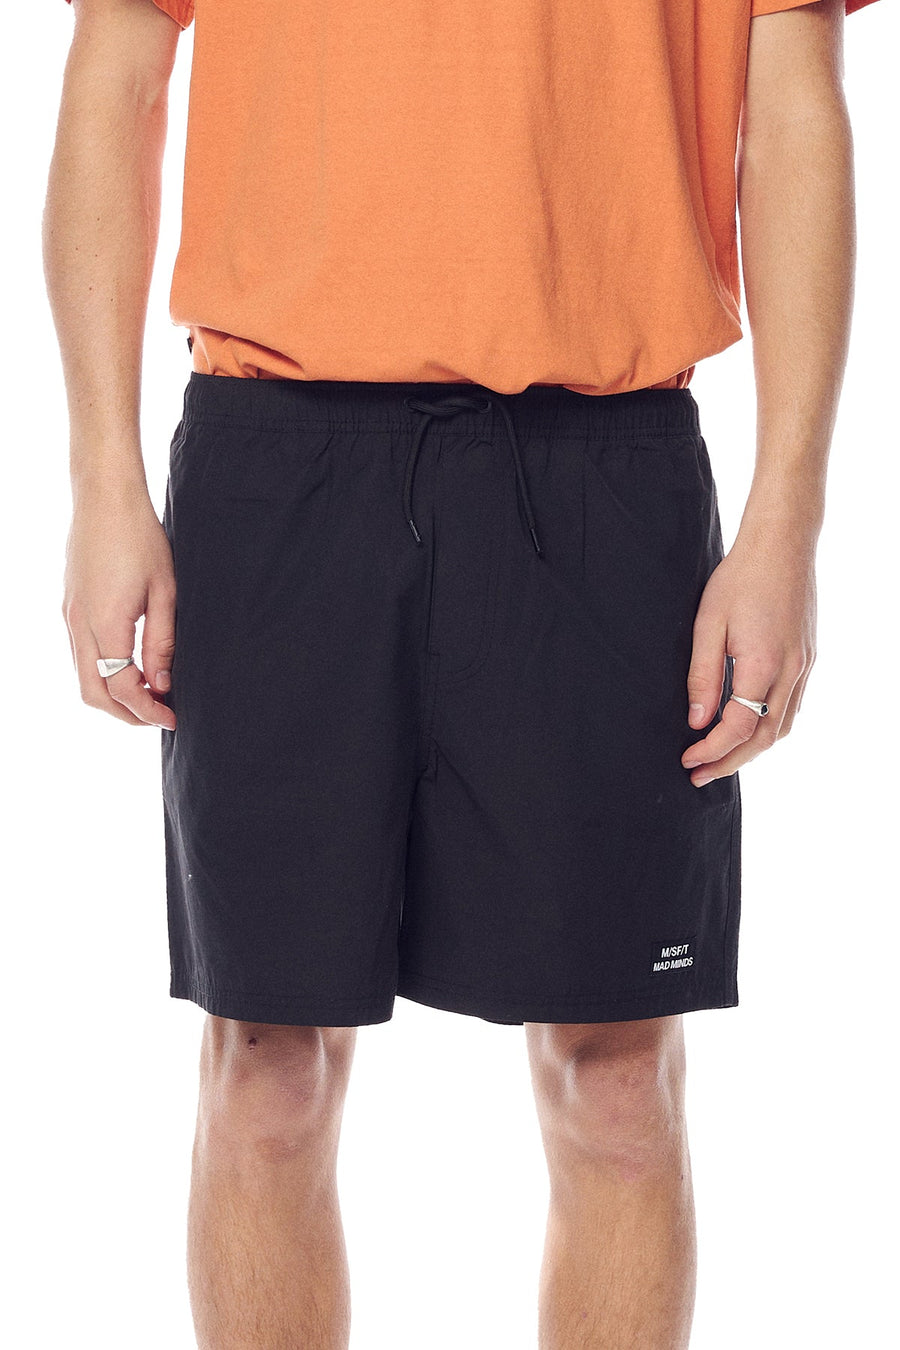 MISFIT RECYCLED POWER SHORT - BLACK